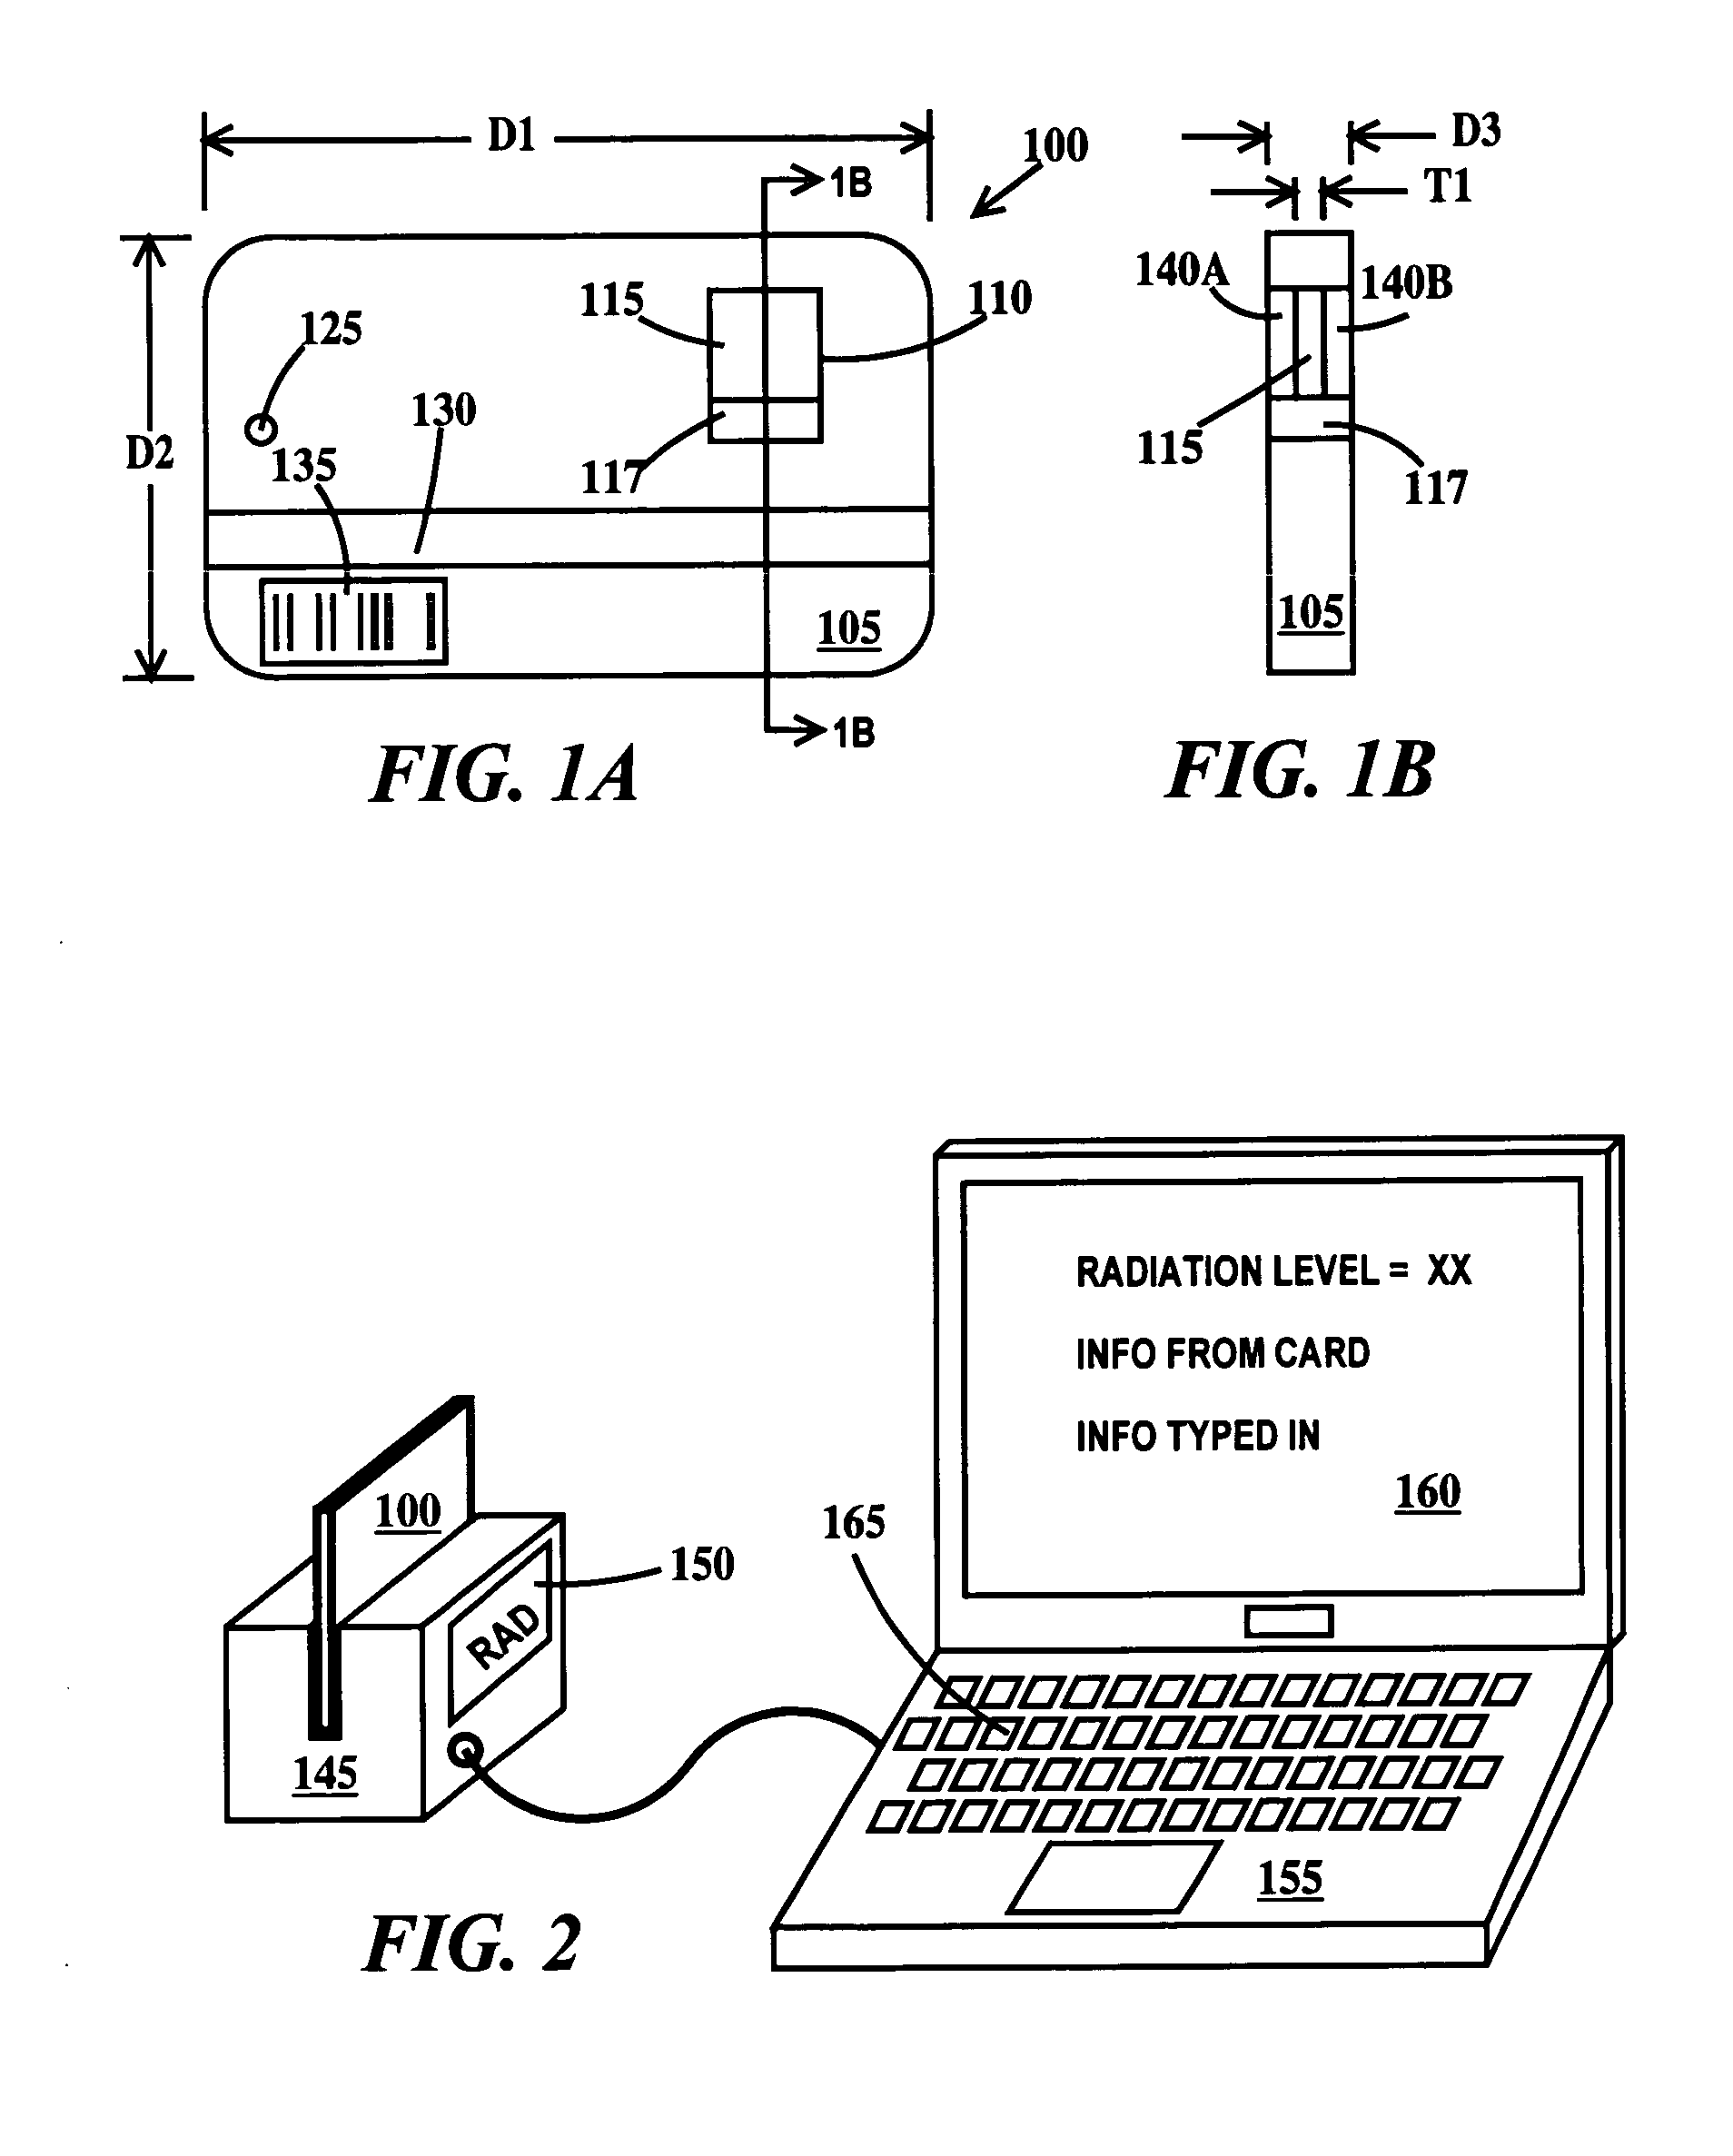 Radiation detection schemes, apparatus and methods of transmitting radiation detection information to a network